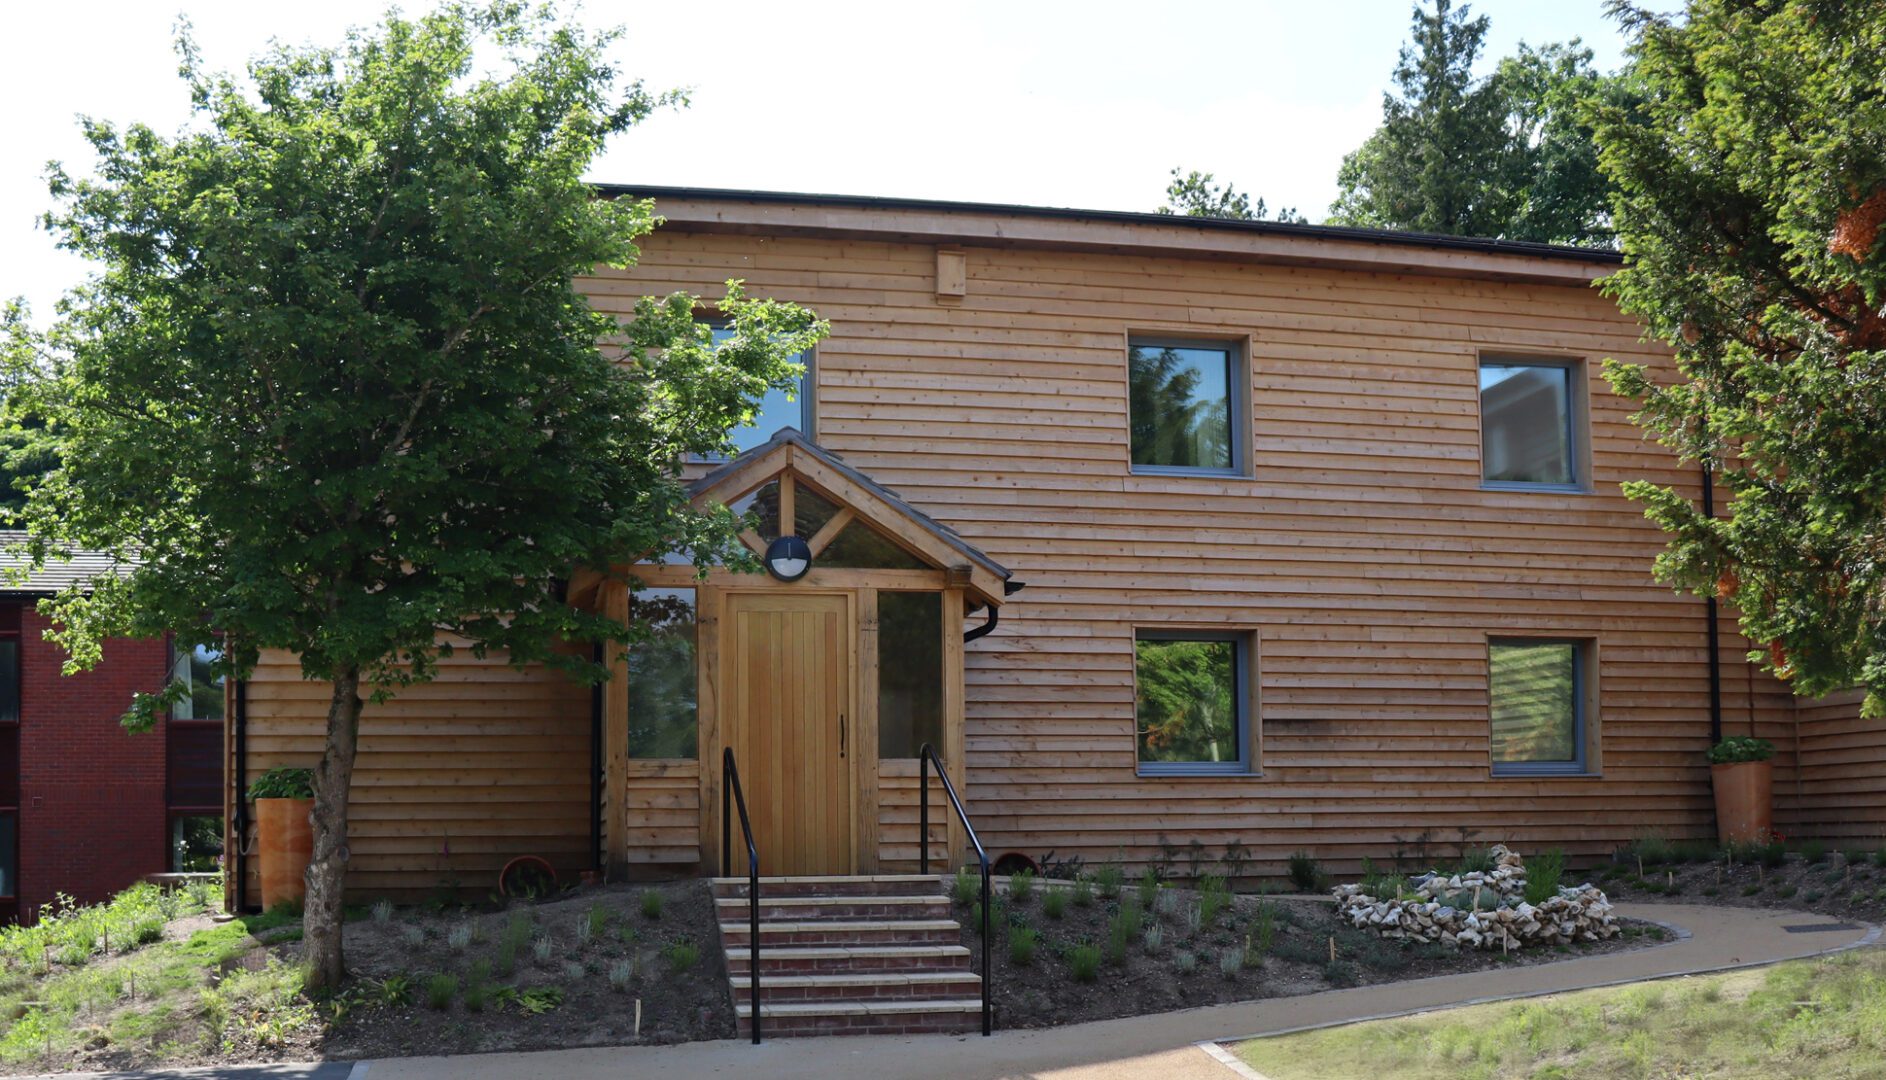 Exterior view of Wetherdown Lodge at The Sustainability Centre in the South Downs National Park